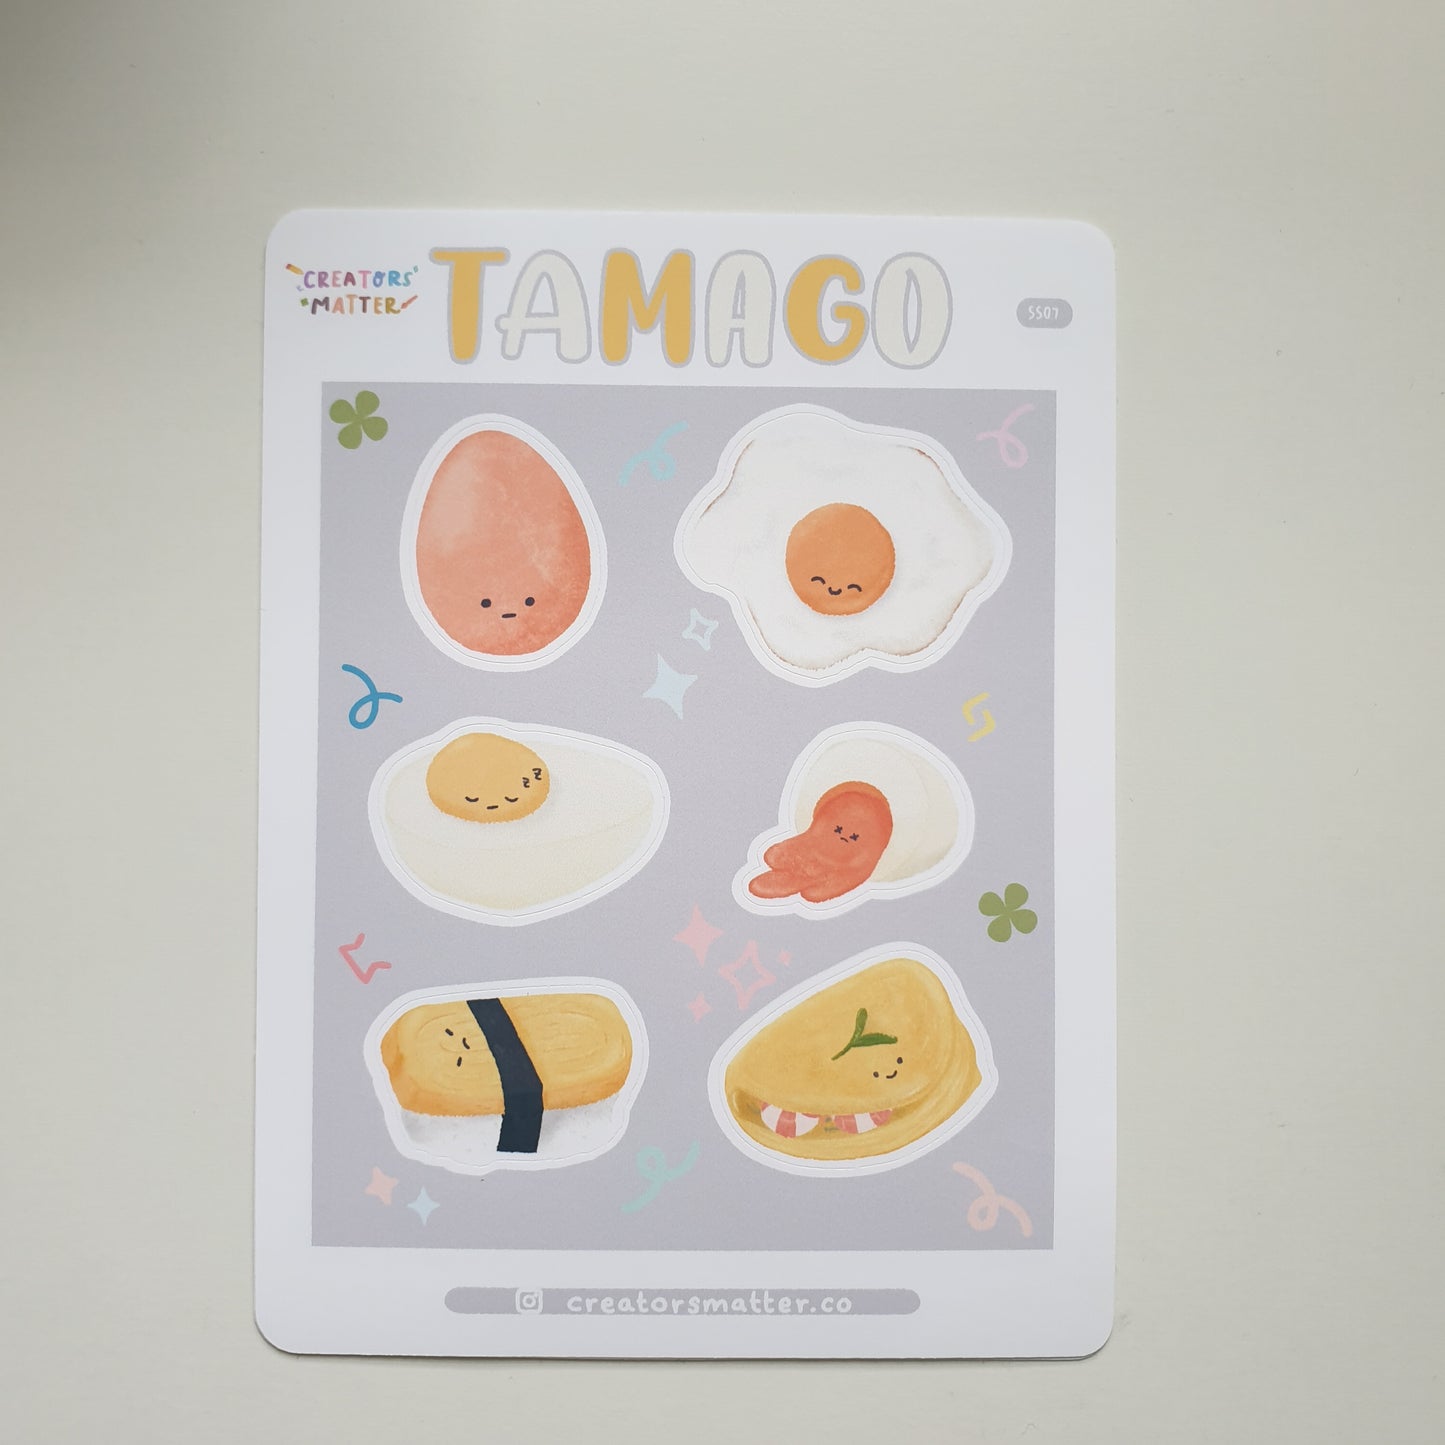 Tamago (with face) Sticker Sheet